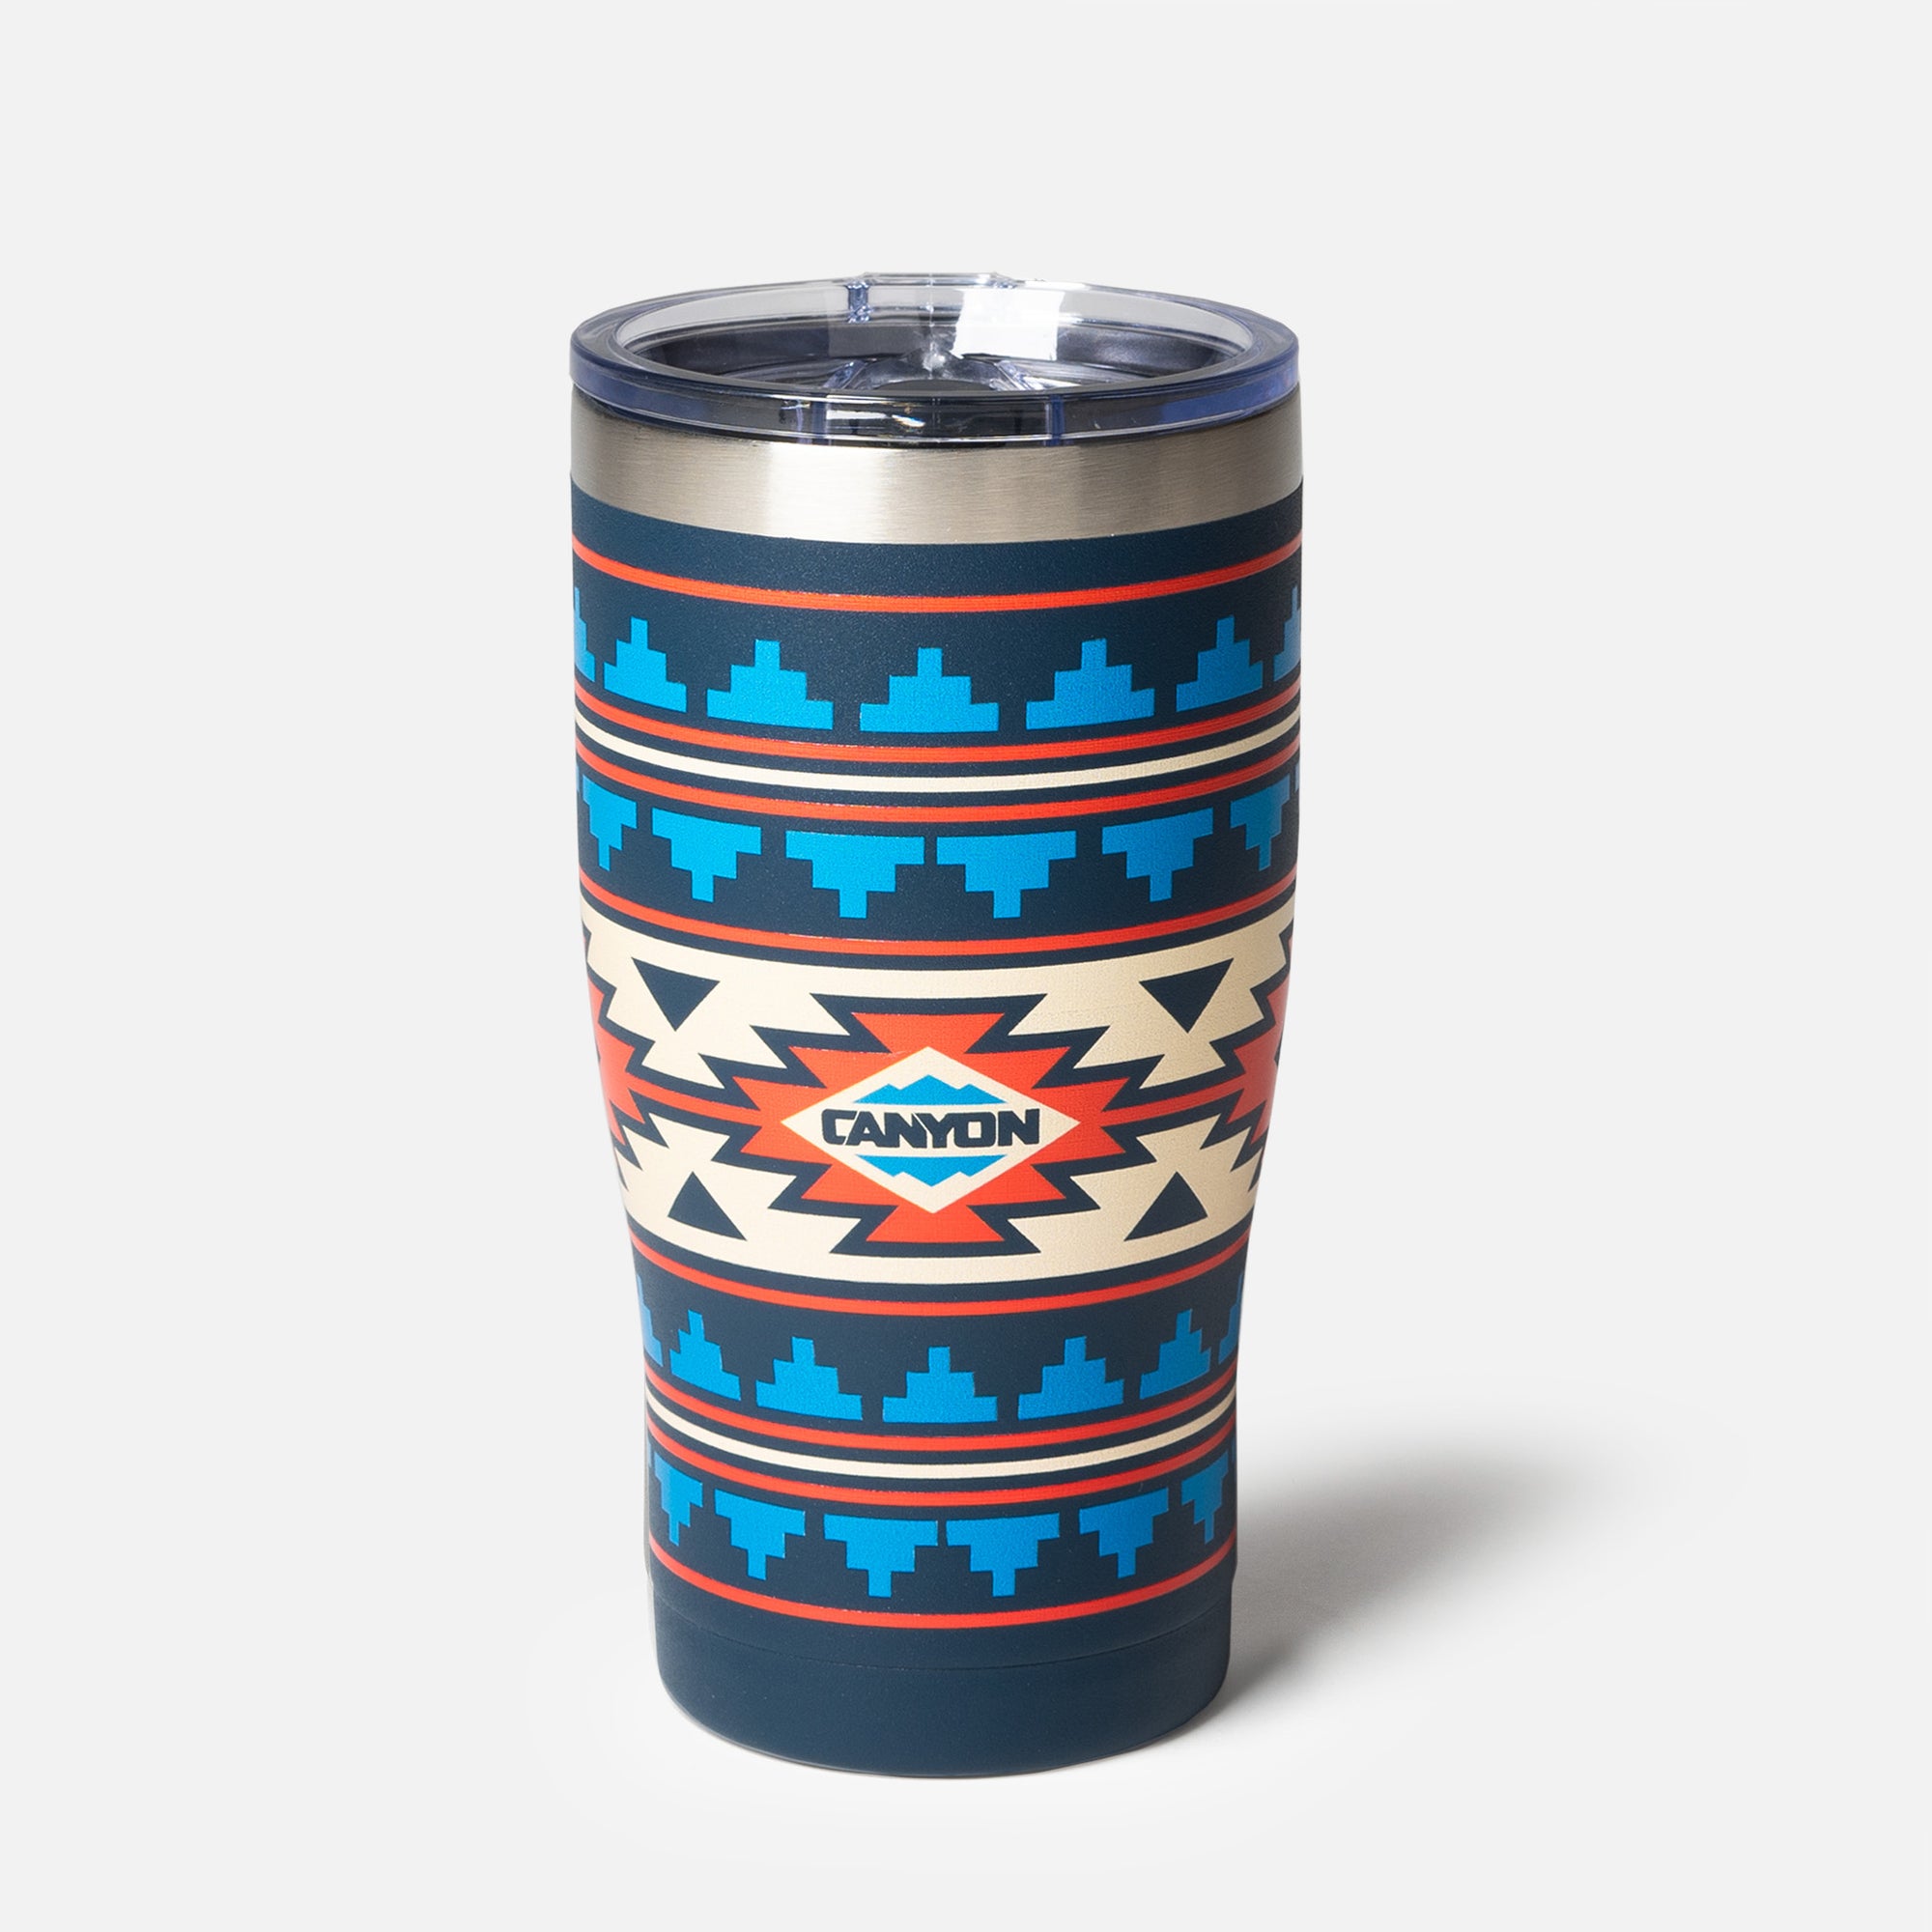 Canyon Coolers 20oz Copper Tumbler